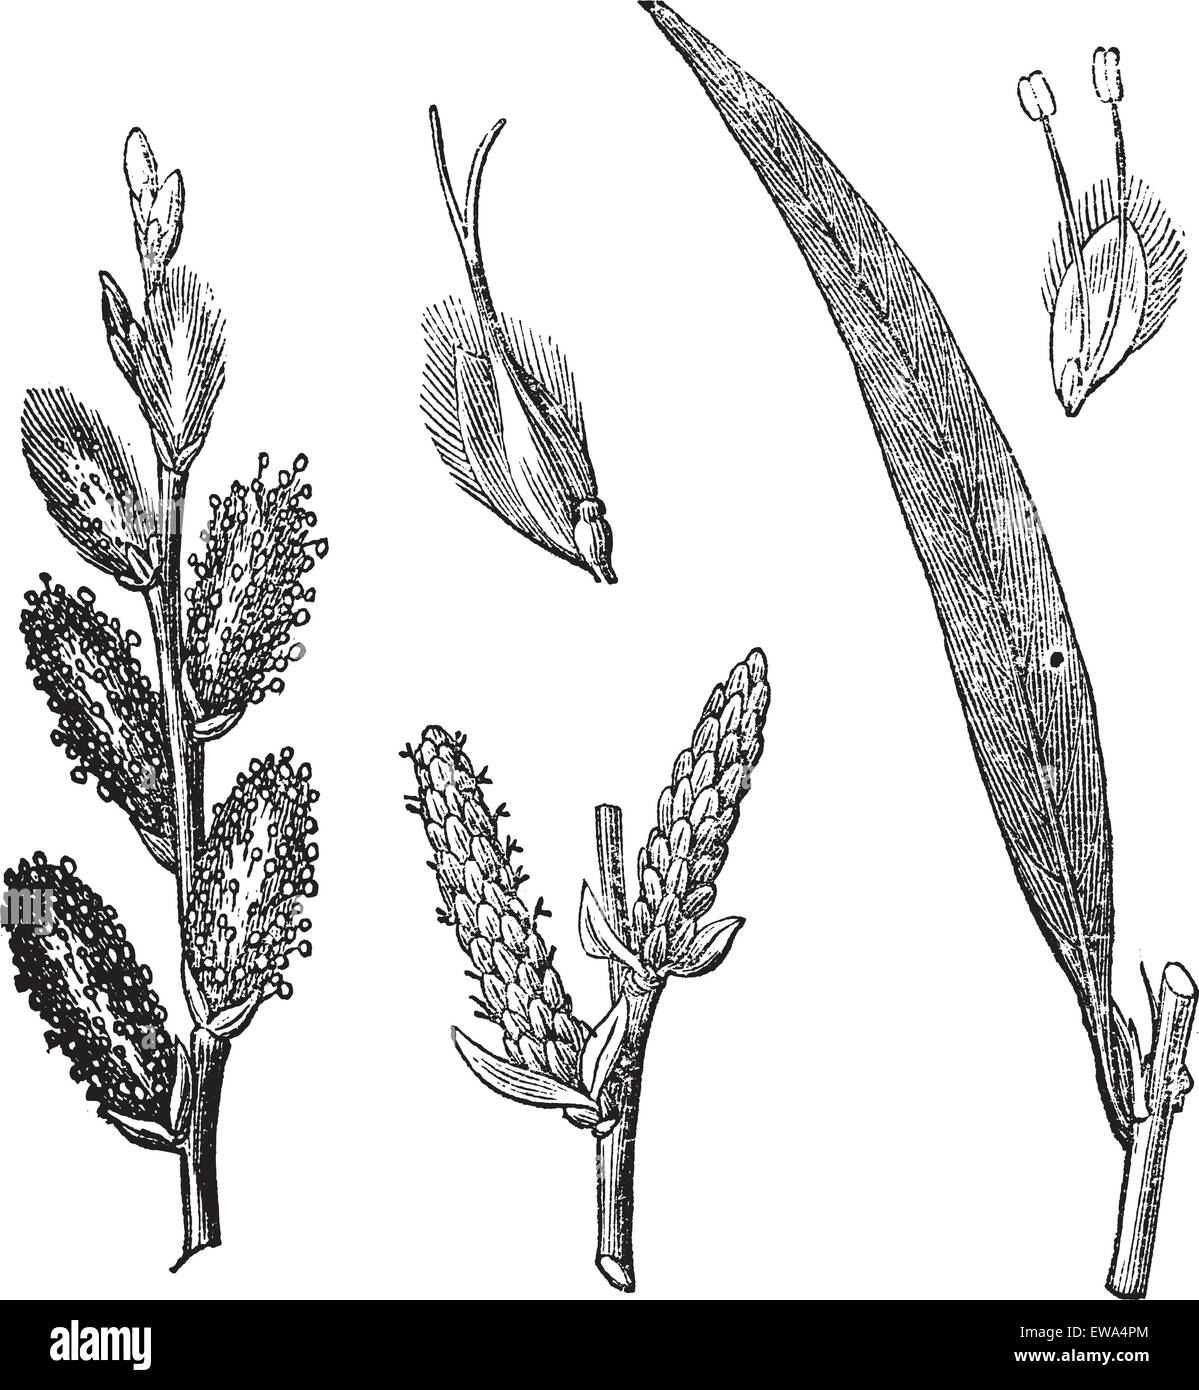 Common Osier or Salix viminalis or Osier or Basket willow, vintage engraving. Old engraved illustration of Common Osier with male and female flowers isolated on a white background. Stock Vector